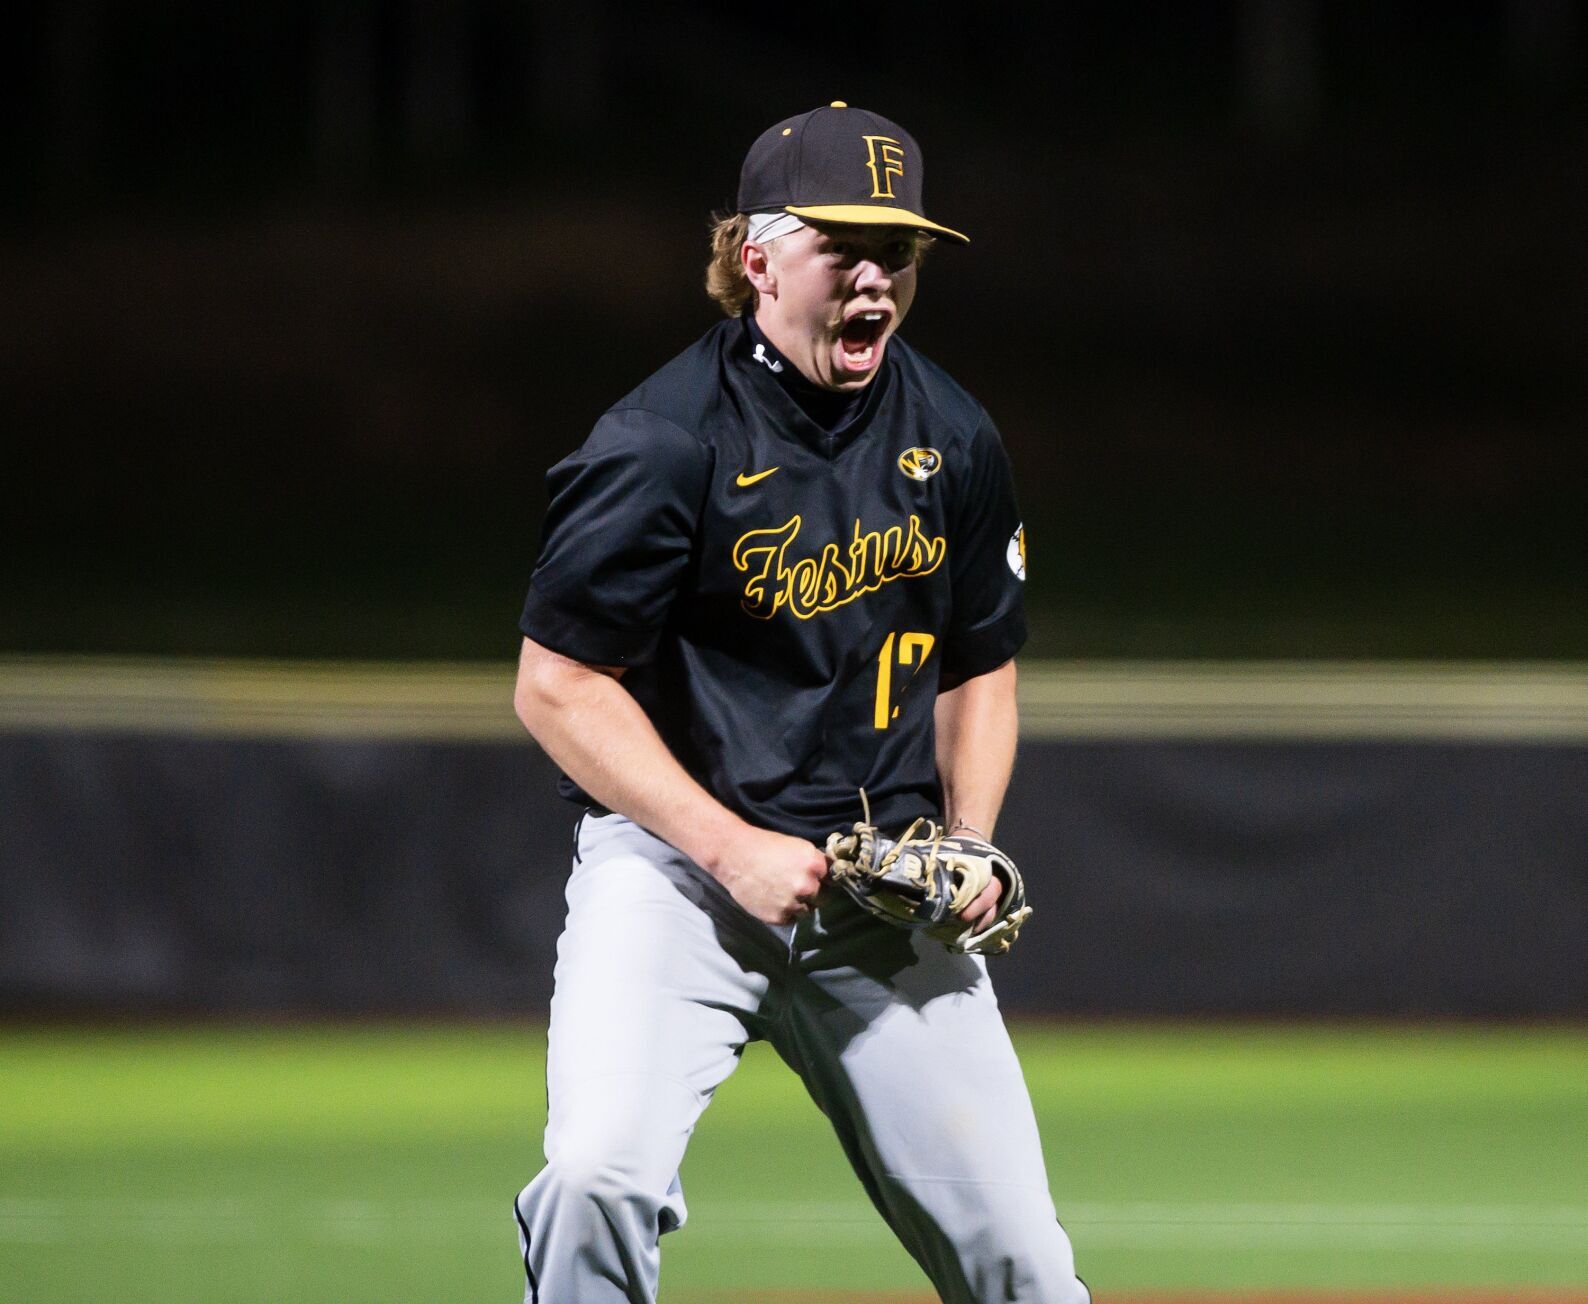 Festus High Baseball Dominates with Elite Pitching in Doubleheader Wins